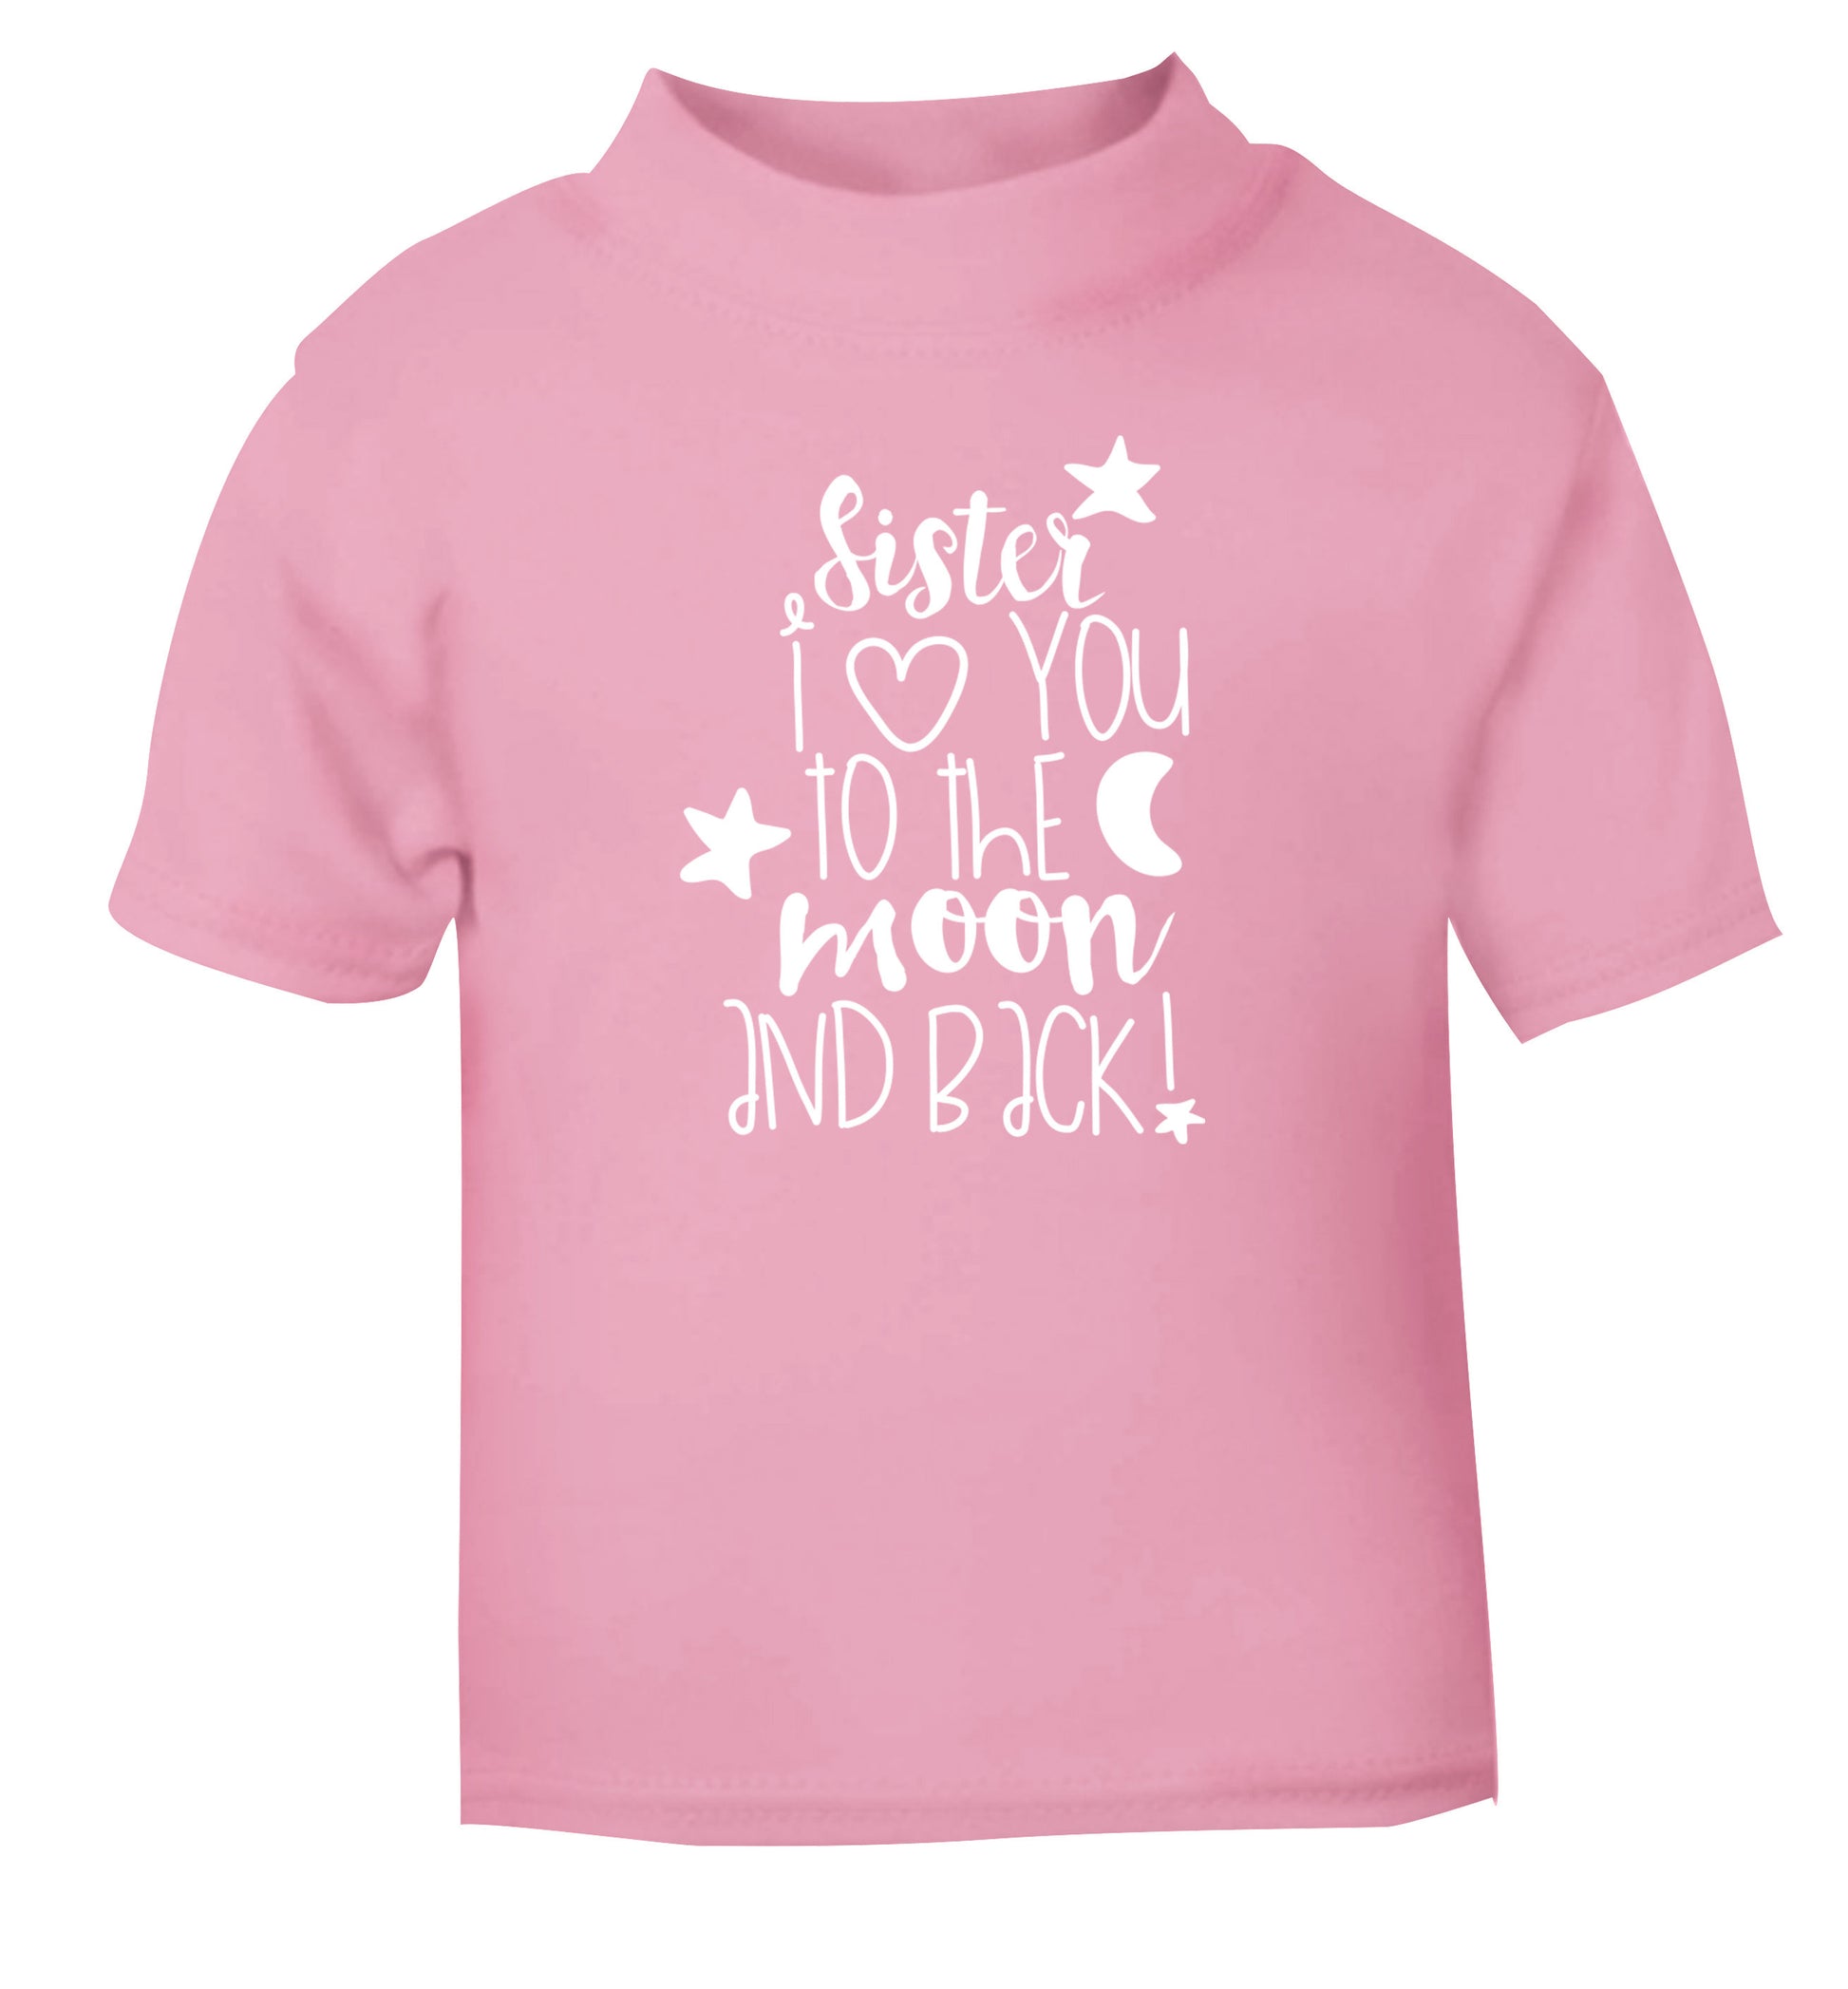 Sister I love you to the moon and back light pink Baby Toddler Tshirt 2 Years